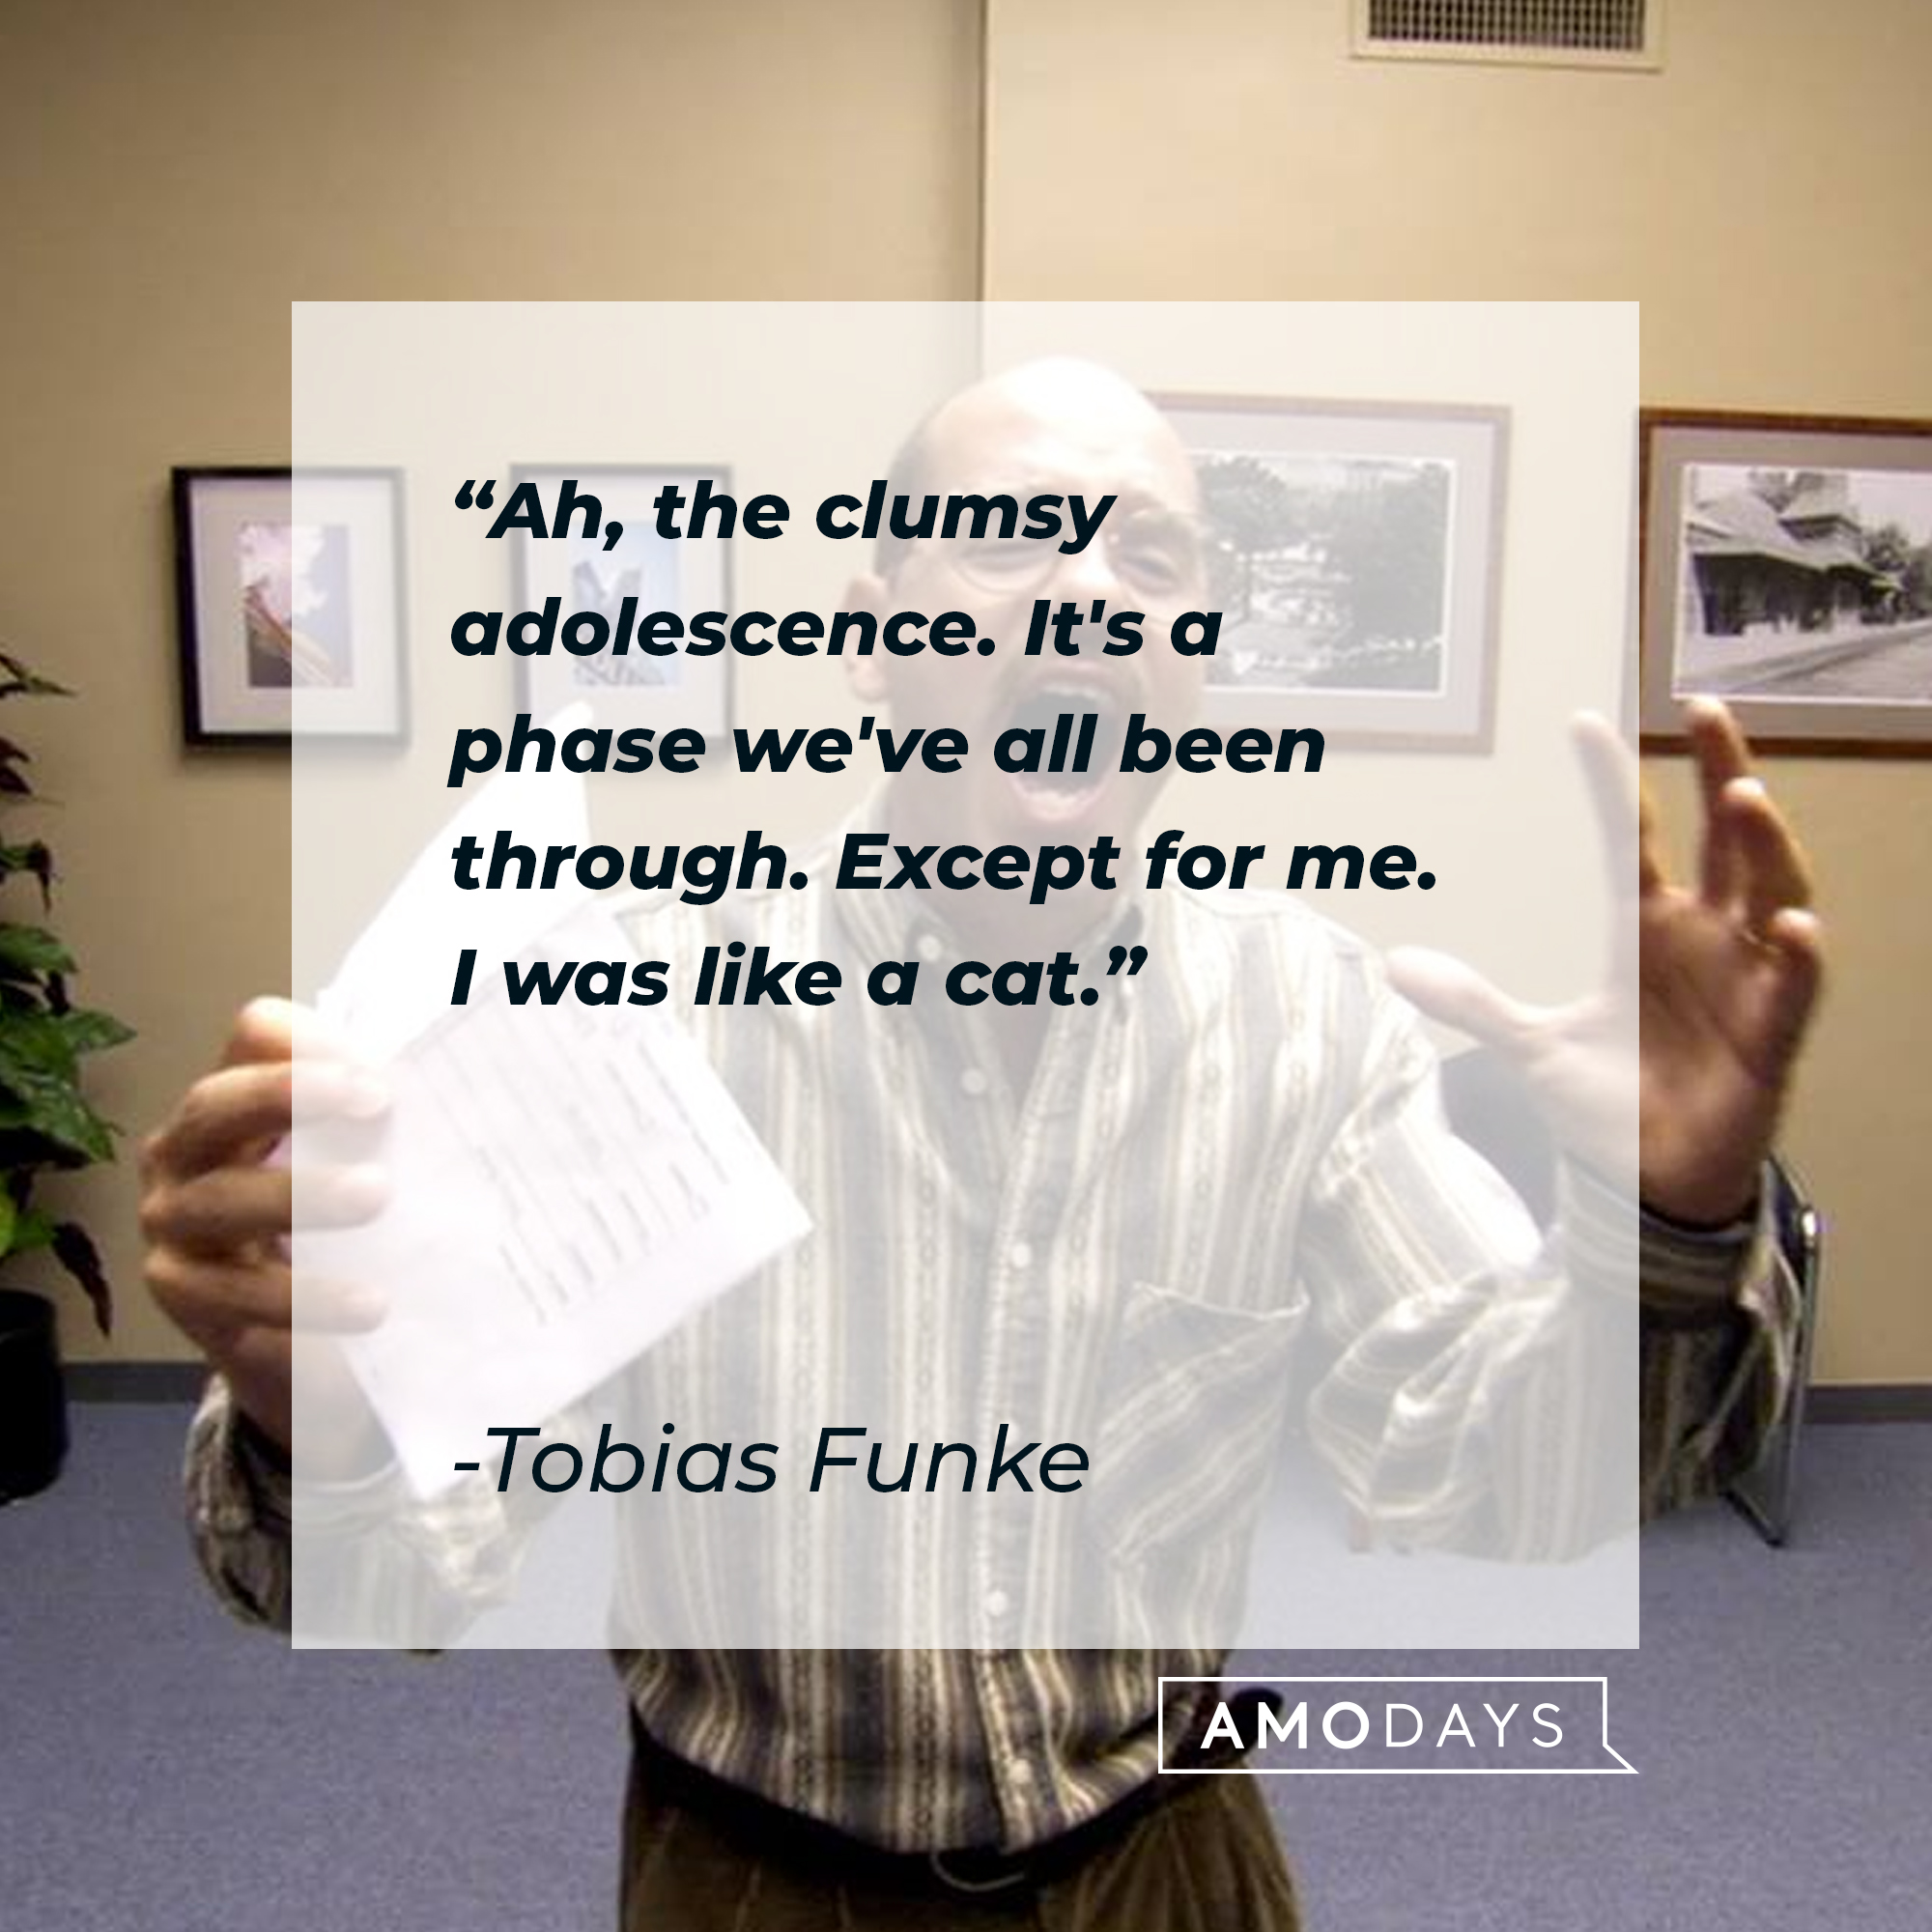 Tobias Funke's quote: "Ah, the clumsy adolescence. It's a phase we've all been through. Except for me. I was like a cat." | Source: Facebook.com/ArrestedDevelopment